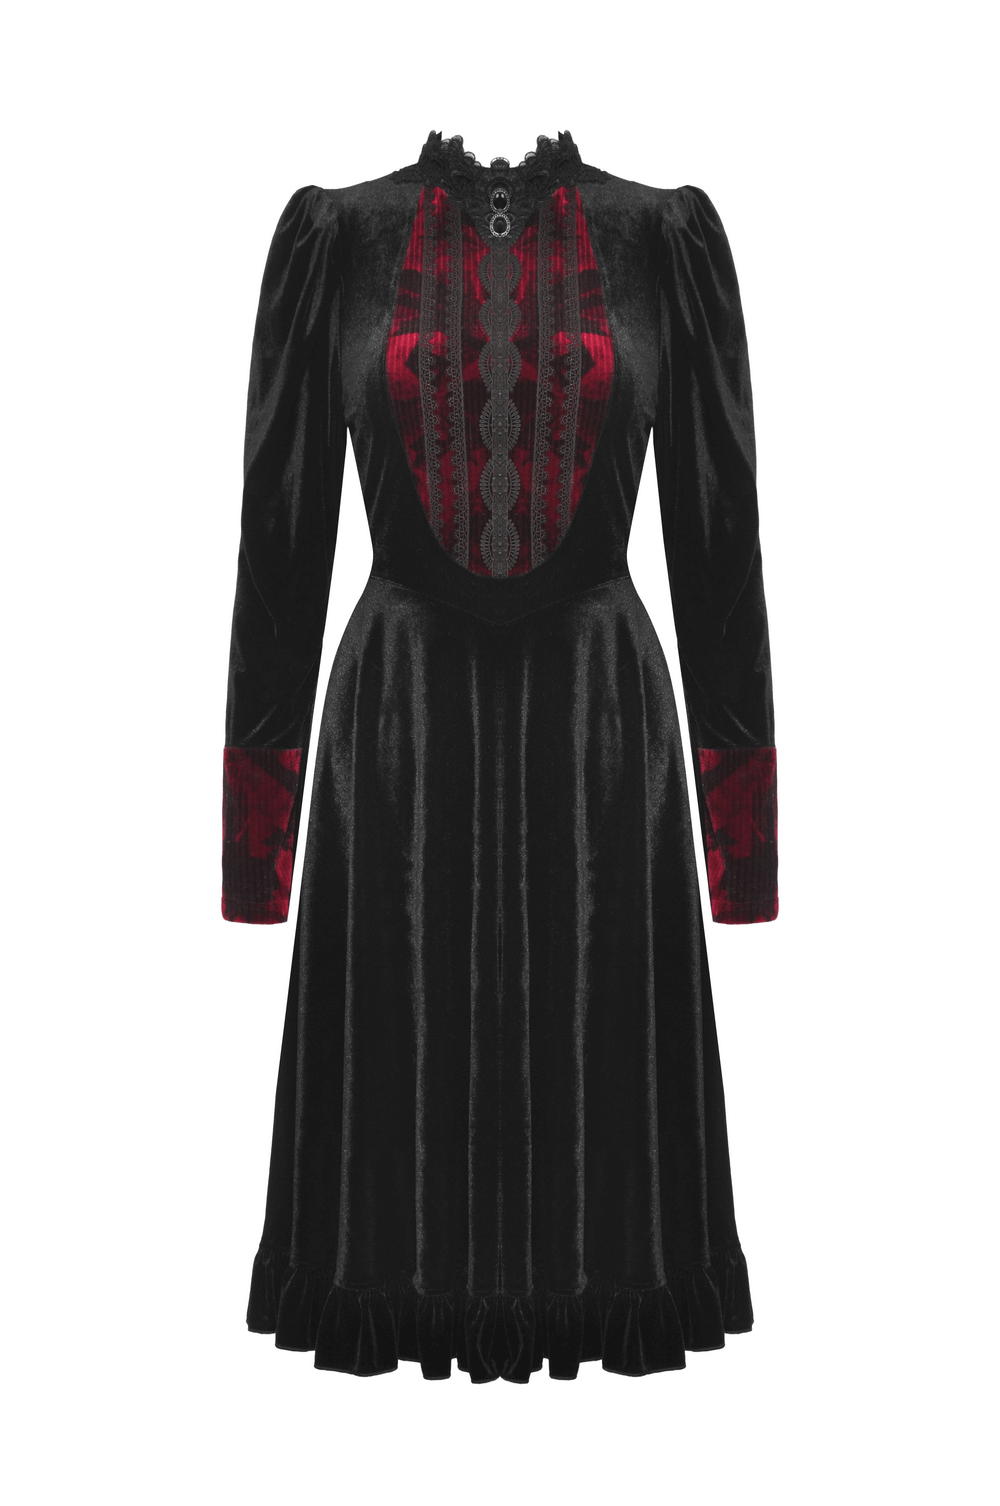 Elegant Black Velvet Dress with Red Lace Accents